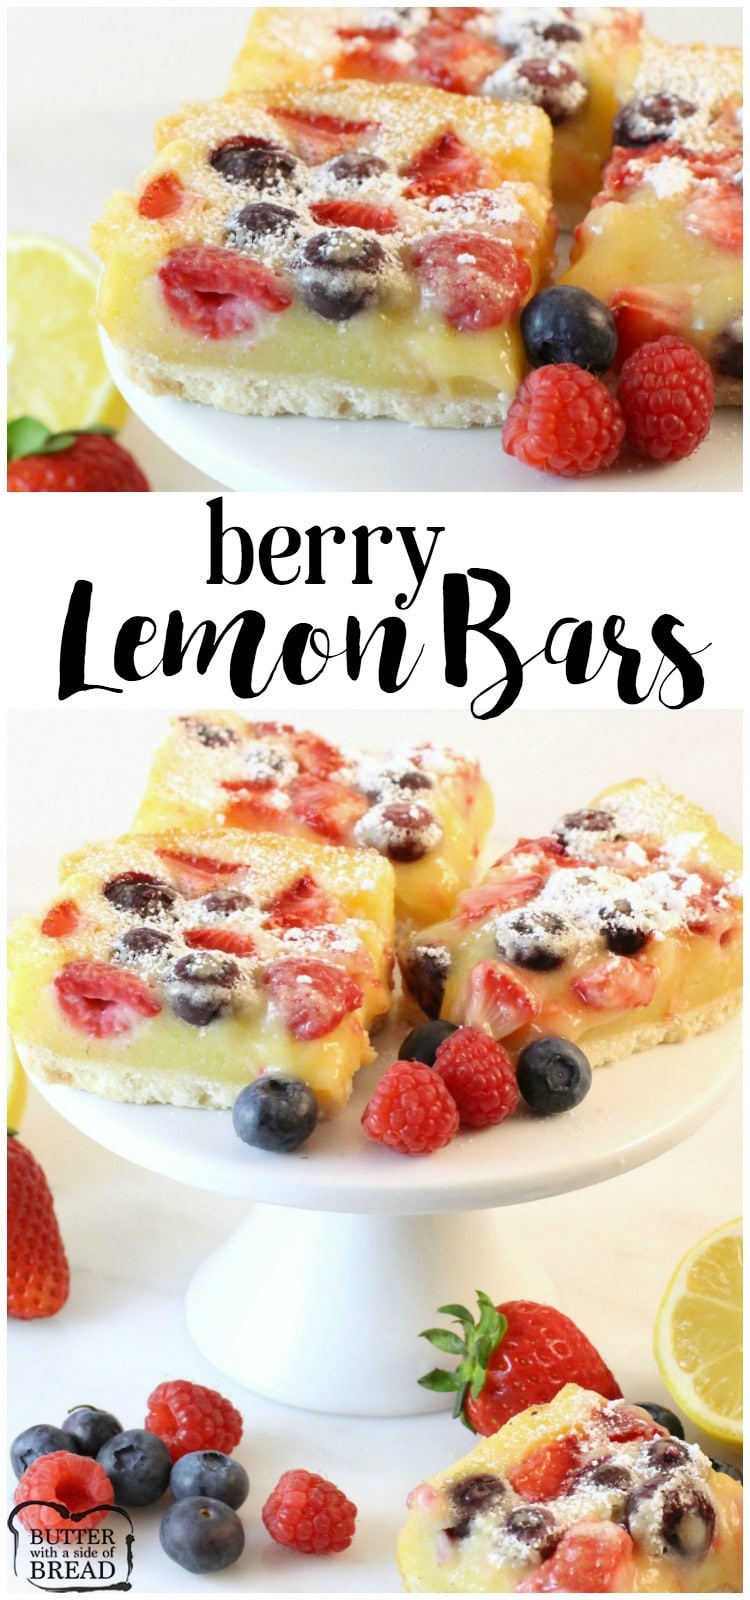 Berry Lemon Bars are a delightful dessert that is perfect for the warm spring and summer months! The fresh fruit in this lemon bar recipe is simply scrumptious and pairs wonderfully with the creamy tart filling.